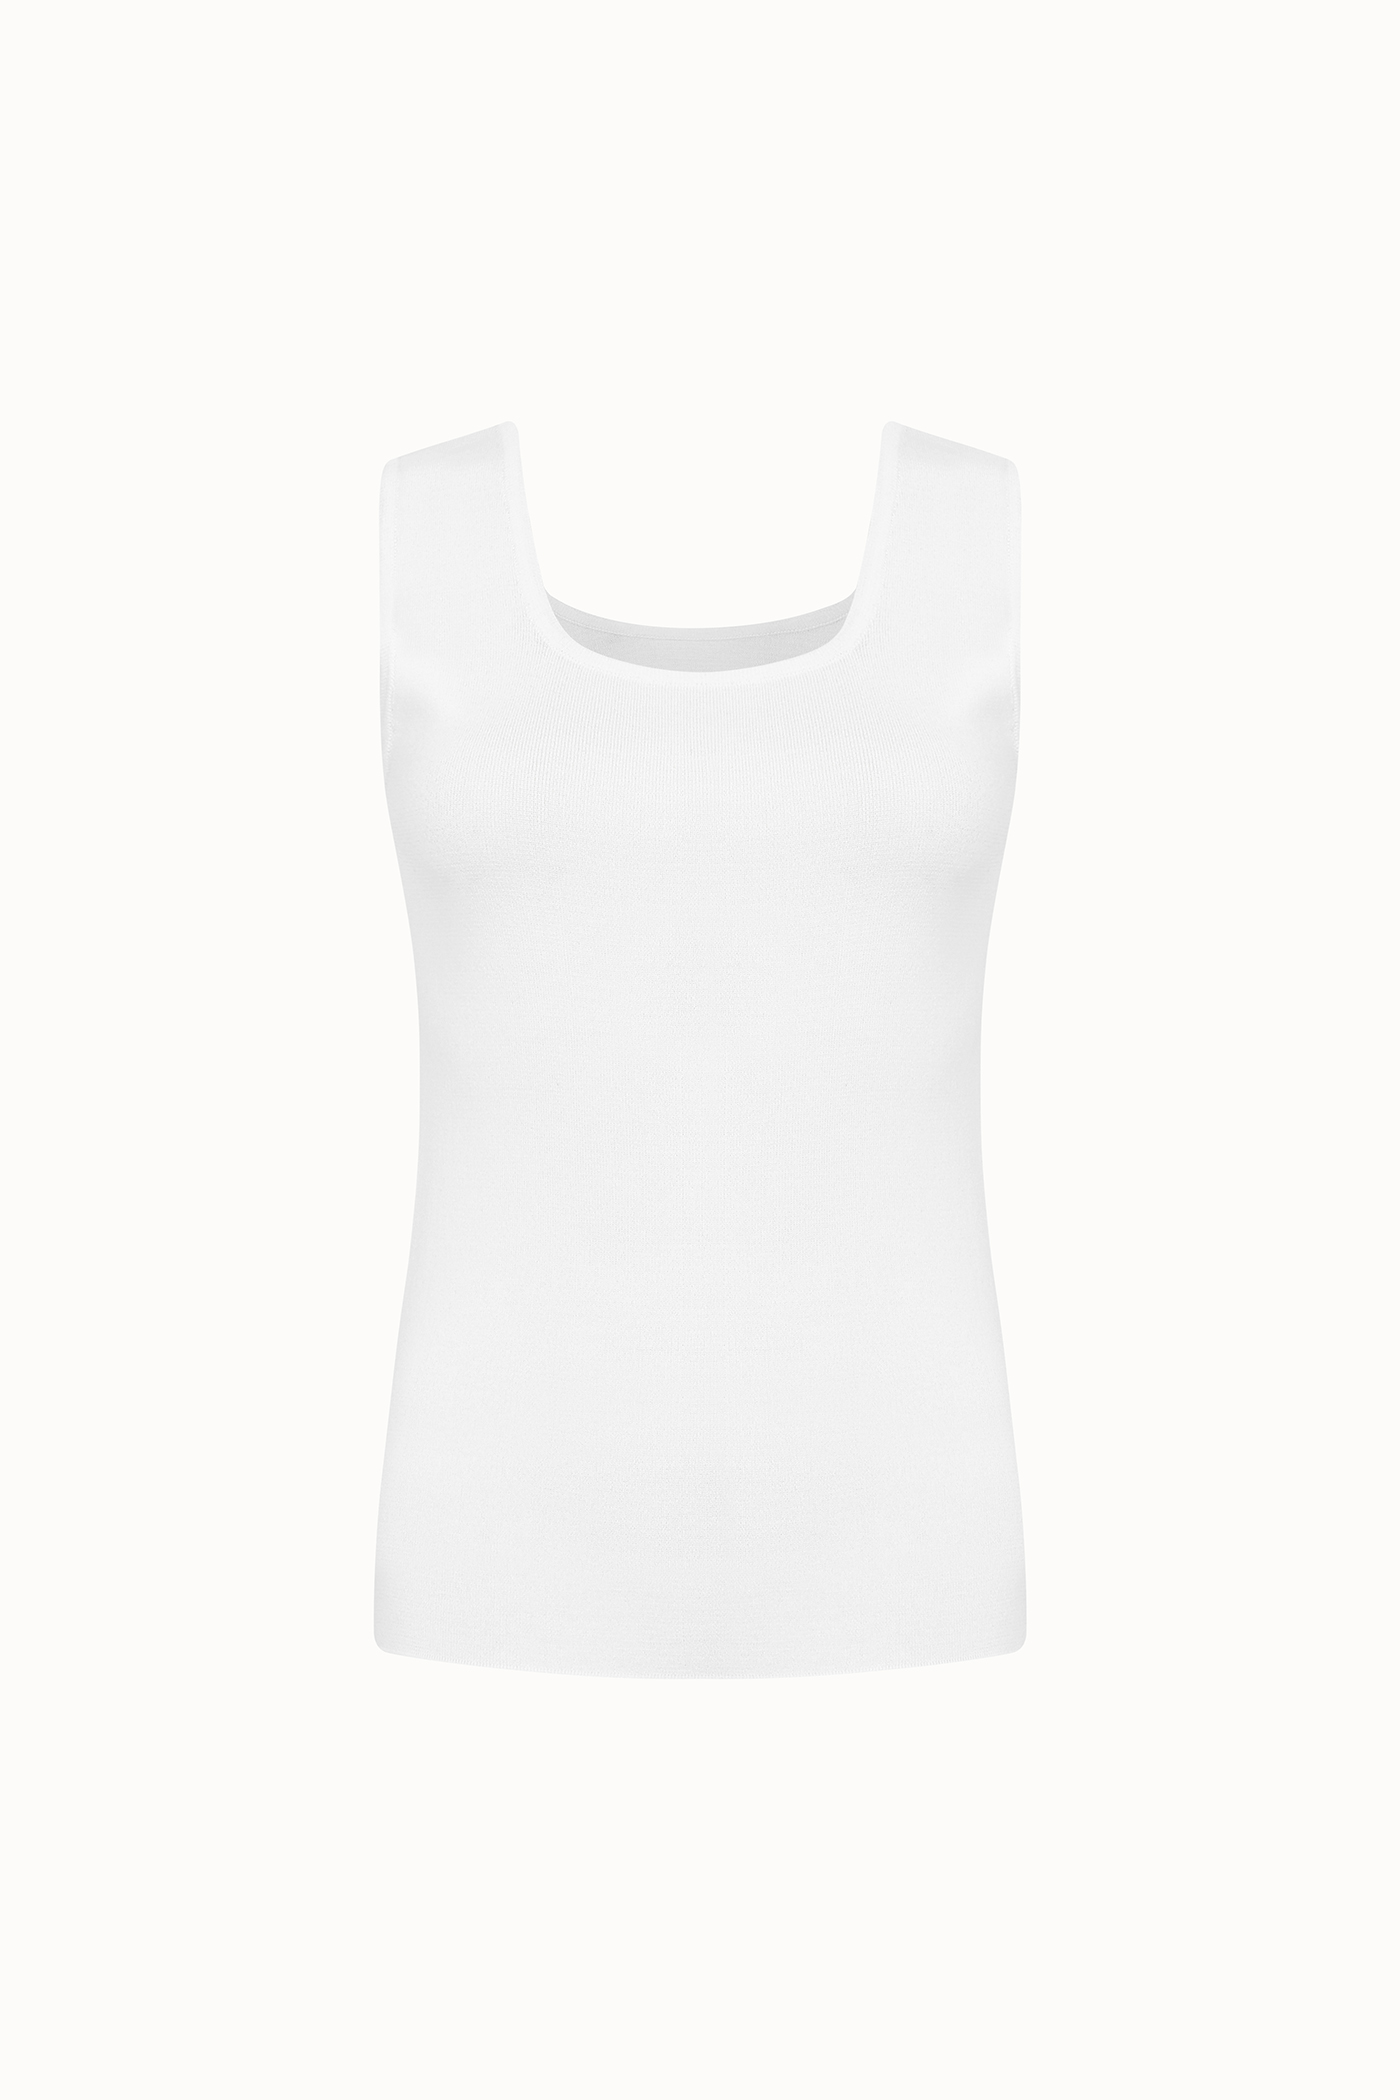 Square Sleeveless[LMBCSUKN184]-5color